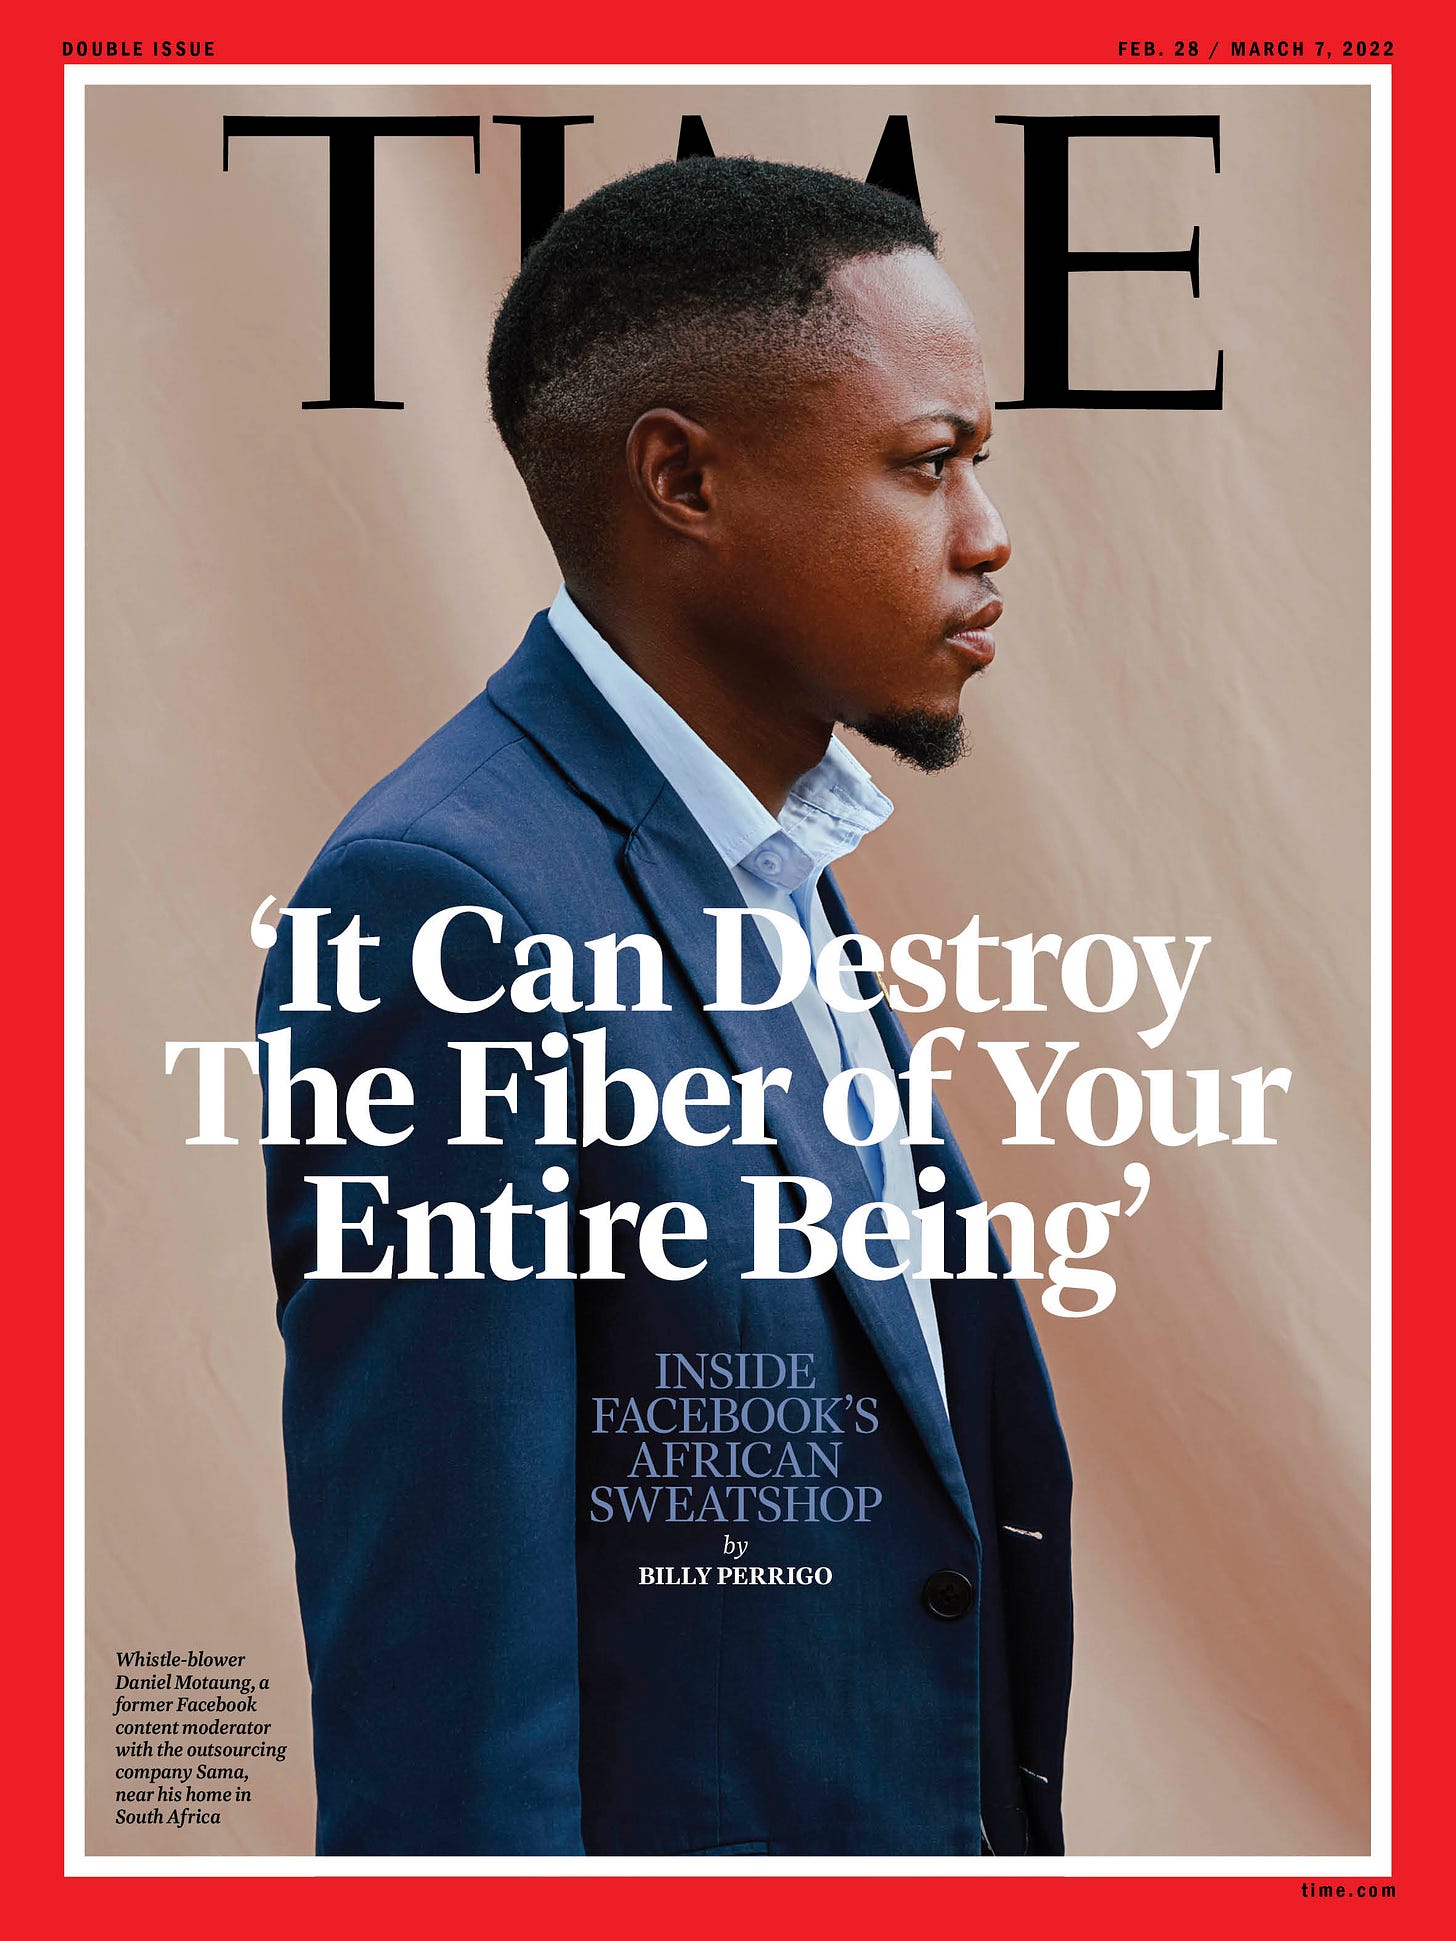 Billy Perrigo on Twitter: "New: Daniel Motaung is on the cover of this  week's issue of TIME. "It can destroy the fiber of your entire being."  Story here: https://t.co/wGHOVWVfyM https://t.co/HnCrFAaJoN" / Twitter